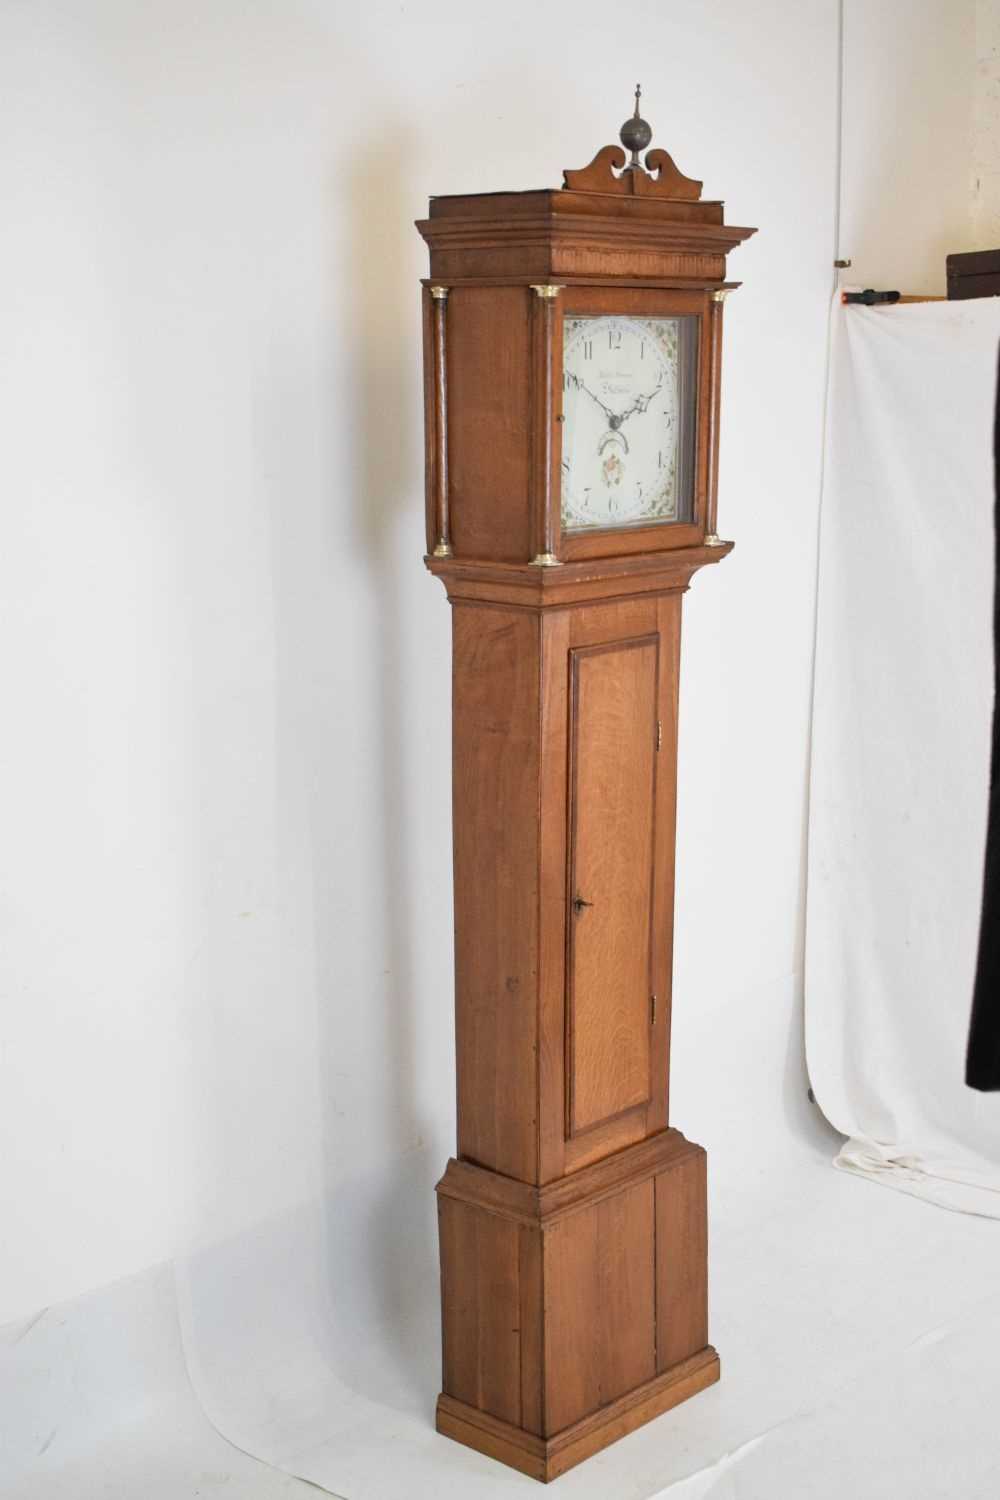 Early 19th Century oak-cased 30-hour painted dial longcase clock - Image 2 of 7